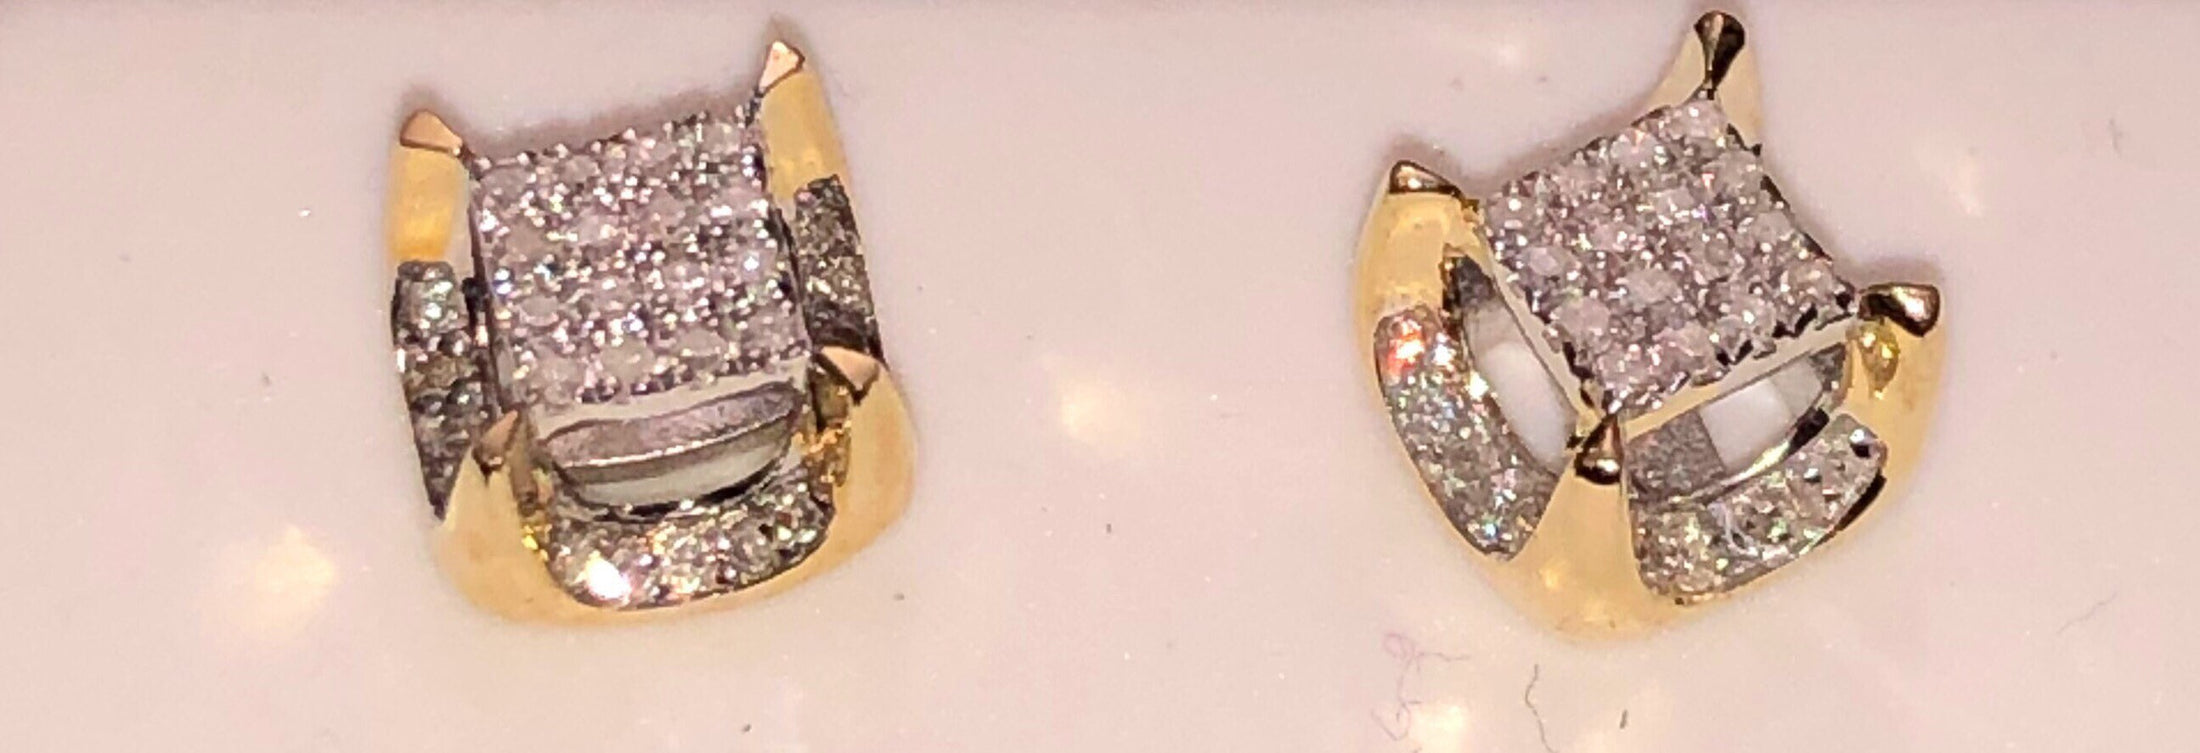 10k solid gold real diamond designer earrings. So beautiful perfect Gift comes w/ certificate of authenticity & gift packaging best gift!